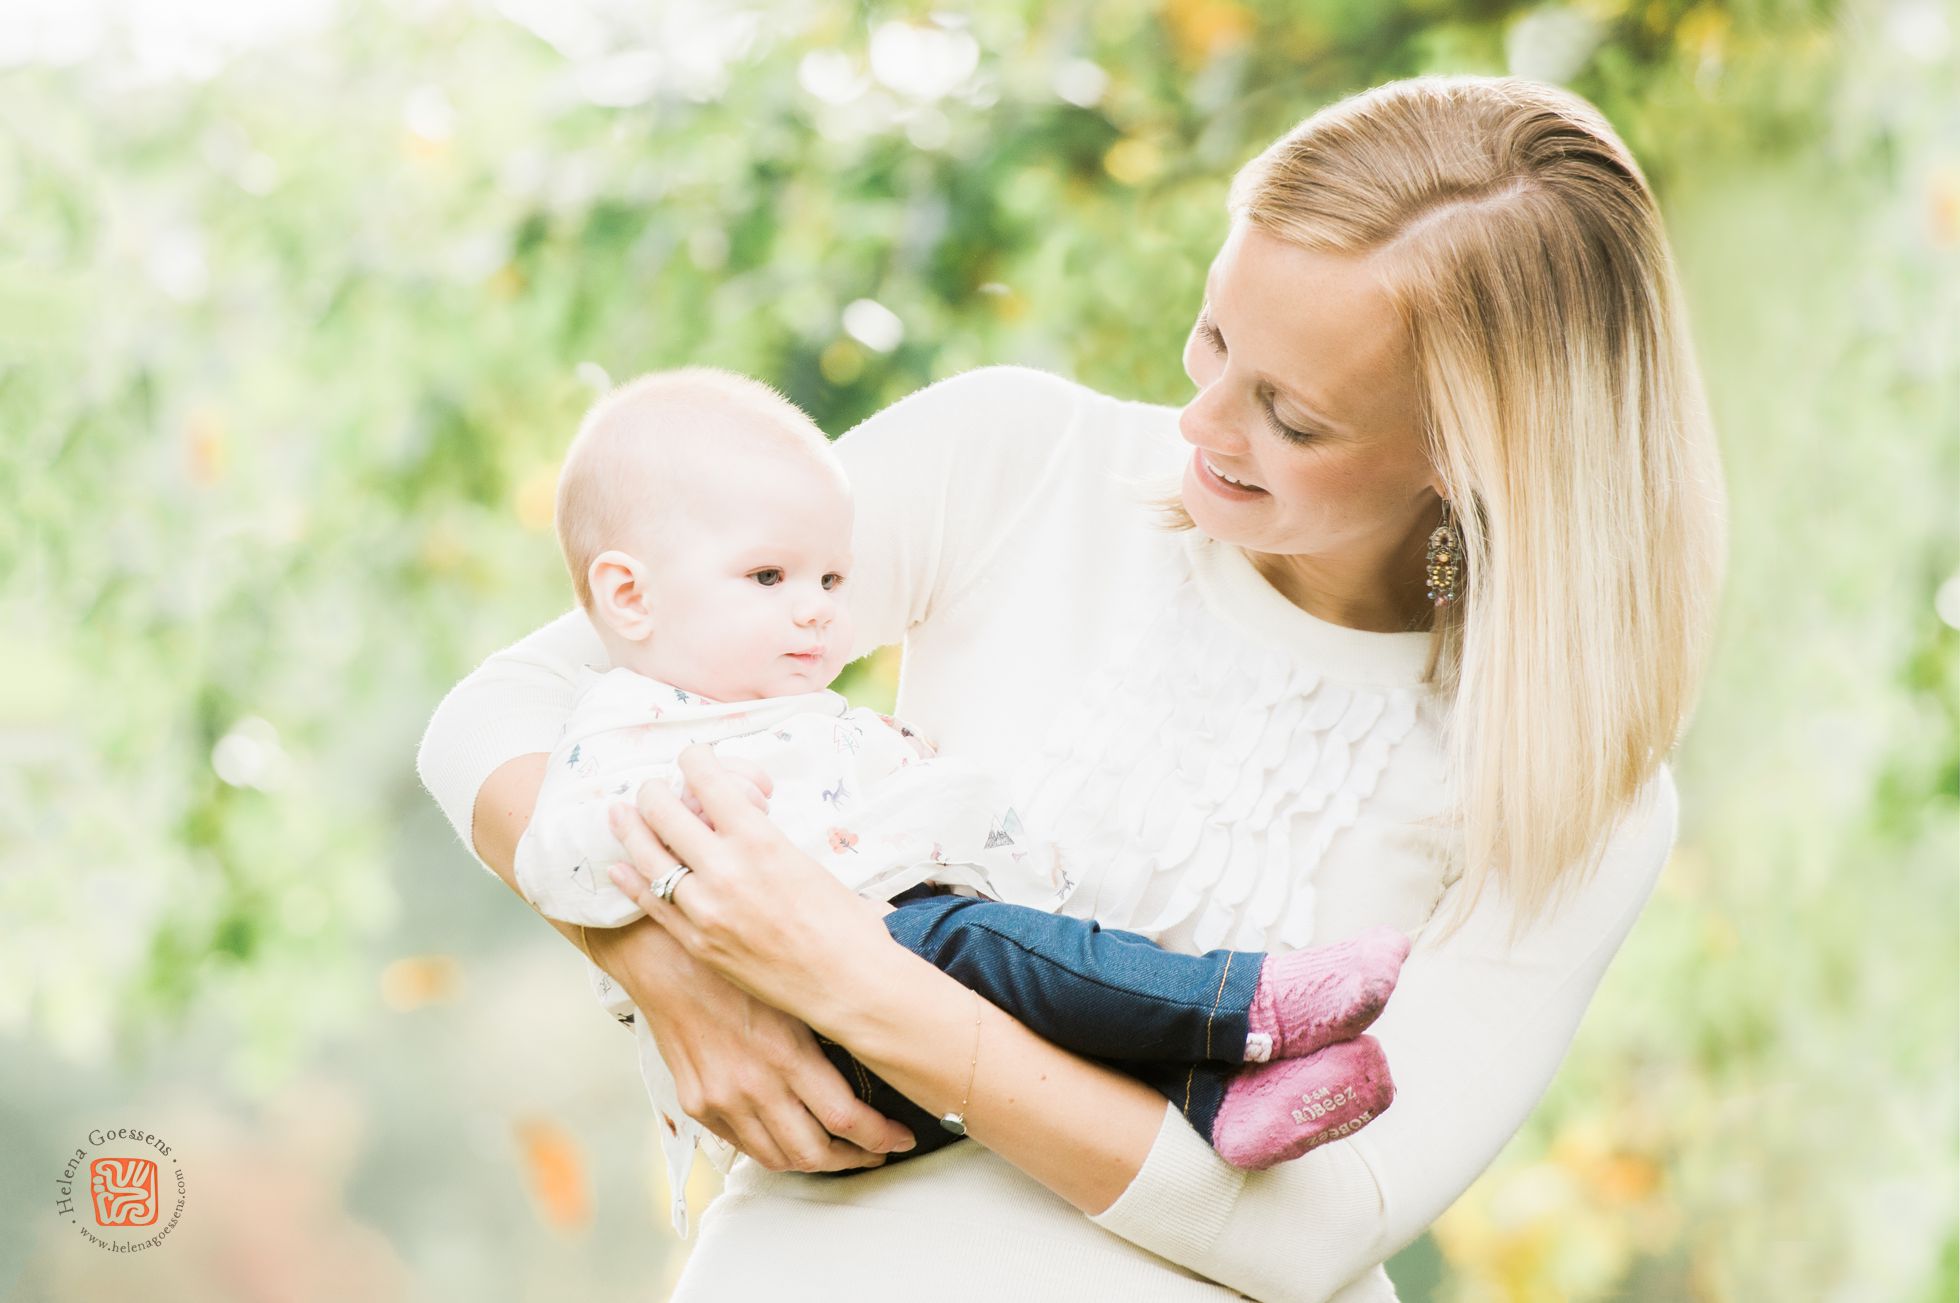 blond woman and a baby wearing a cream sweater